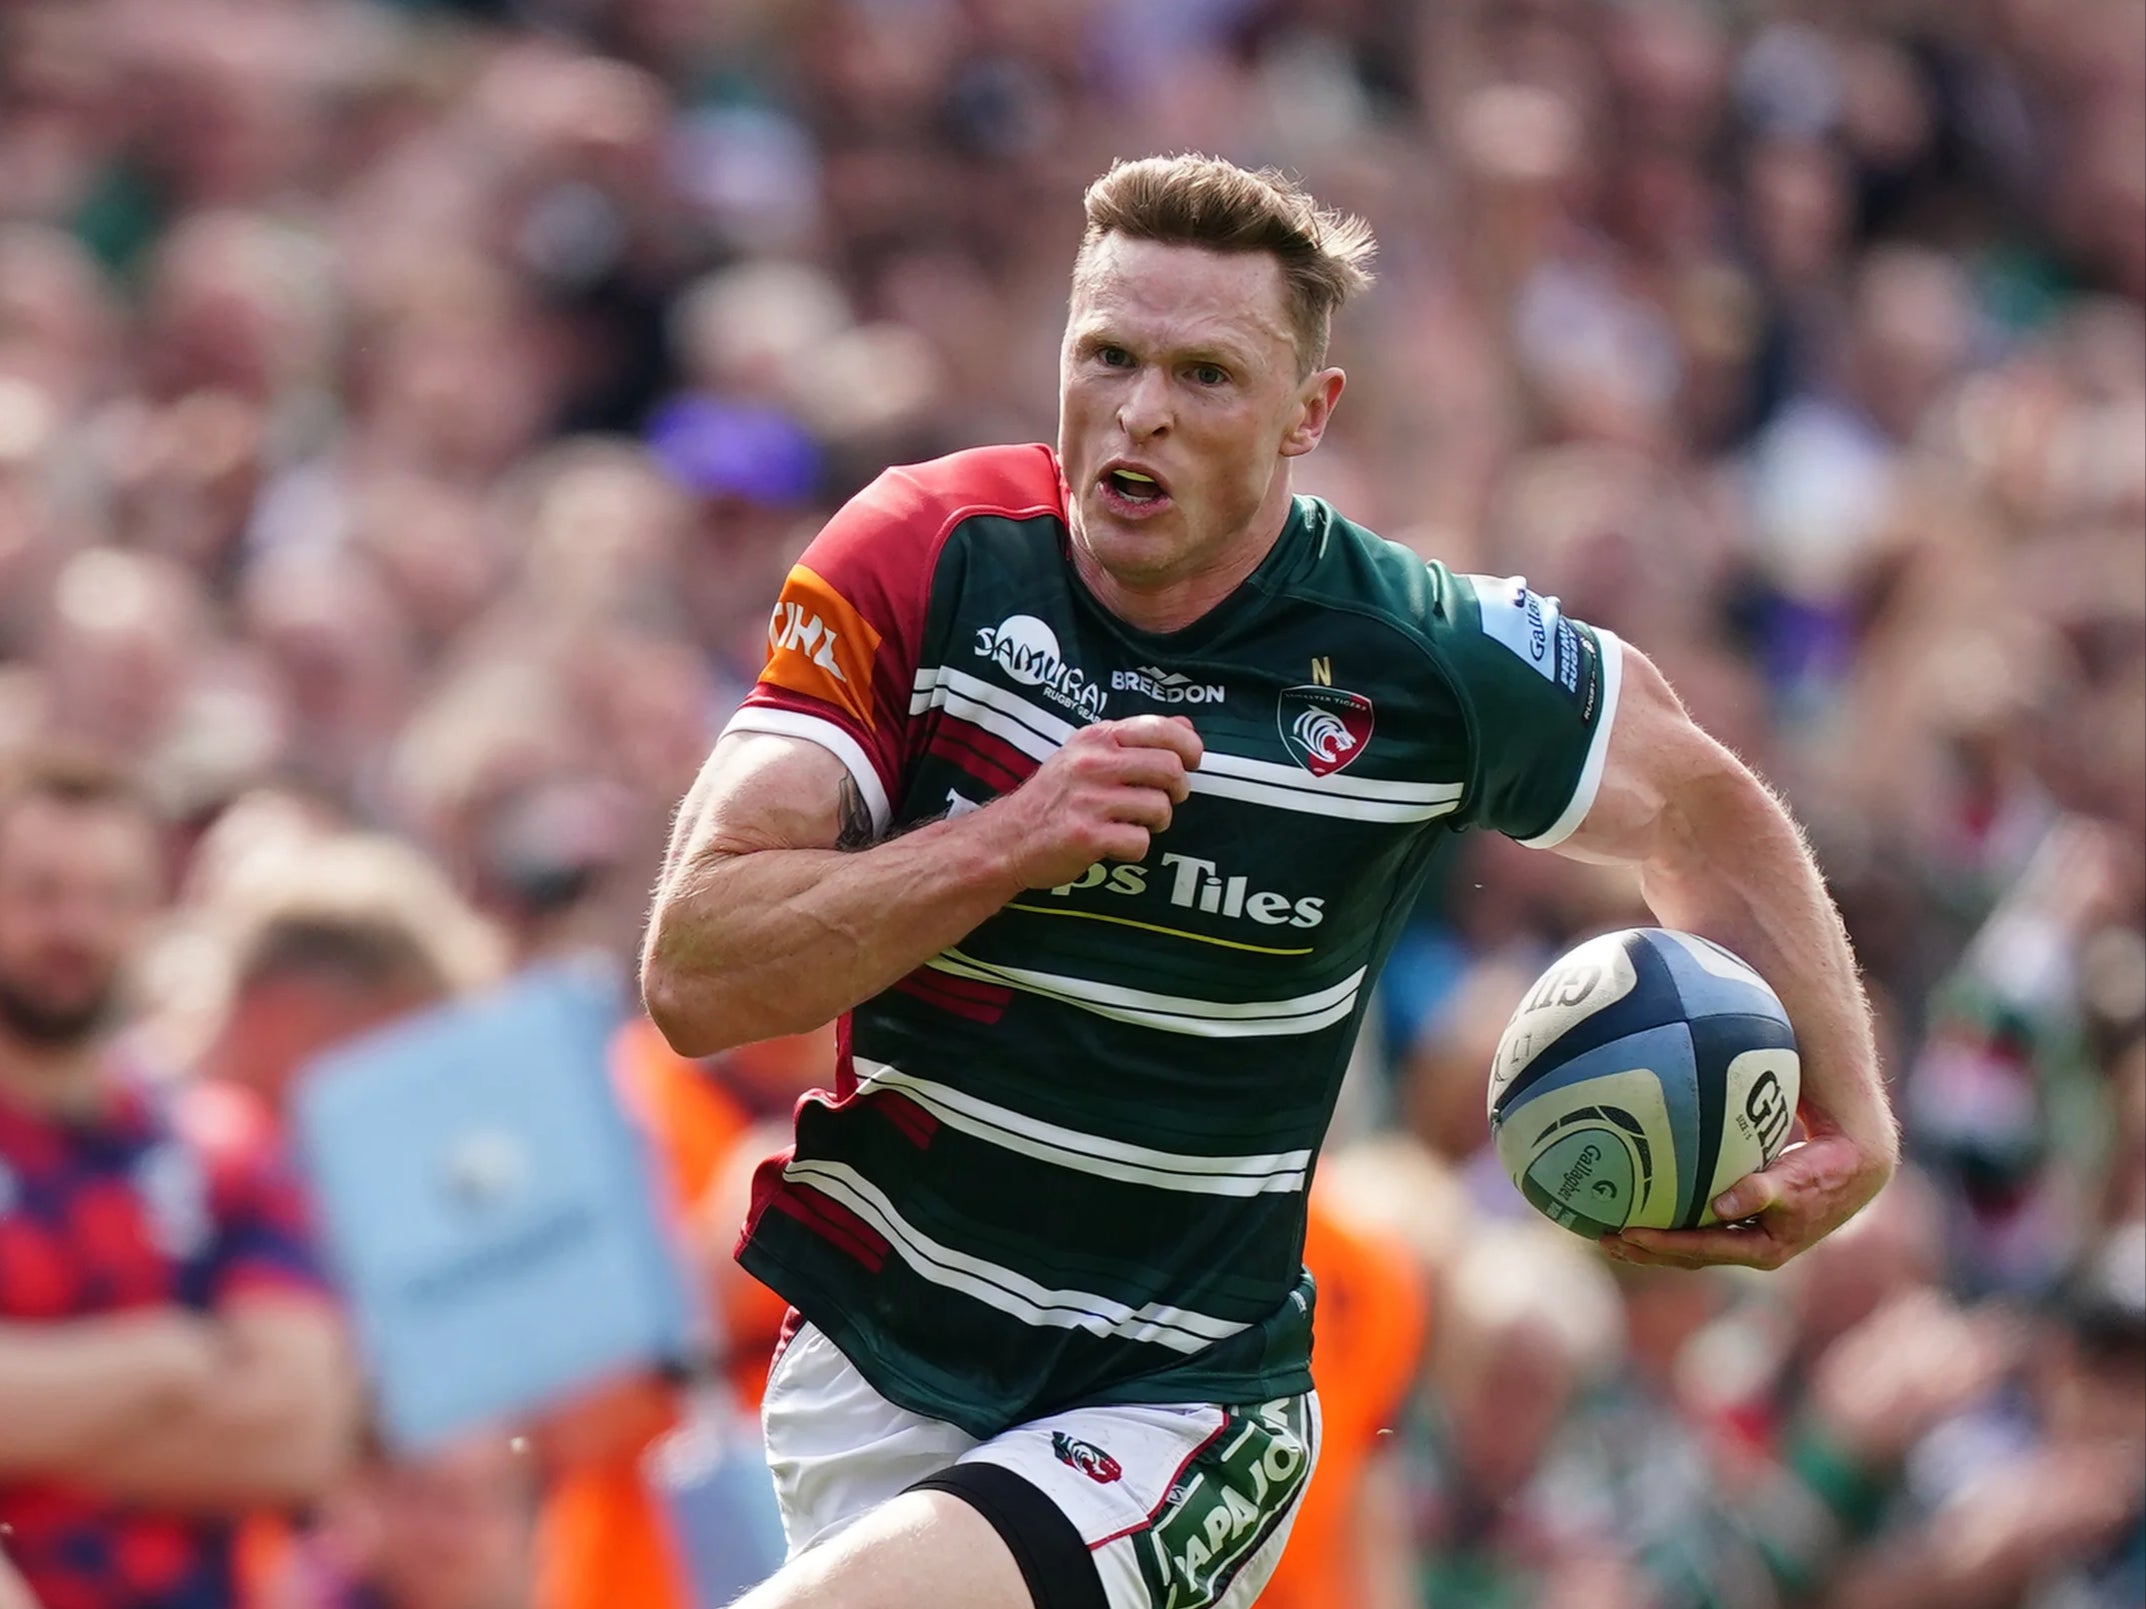 Leicester wing Chris Ashton has agreed a new deal with the Tigers